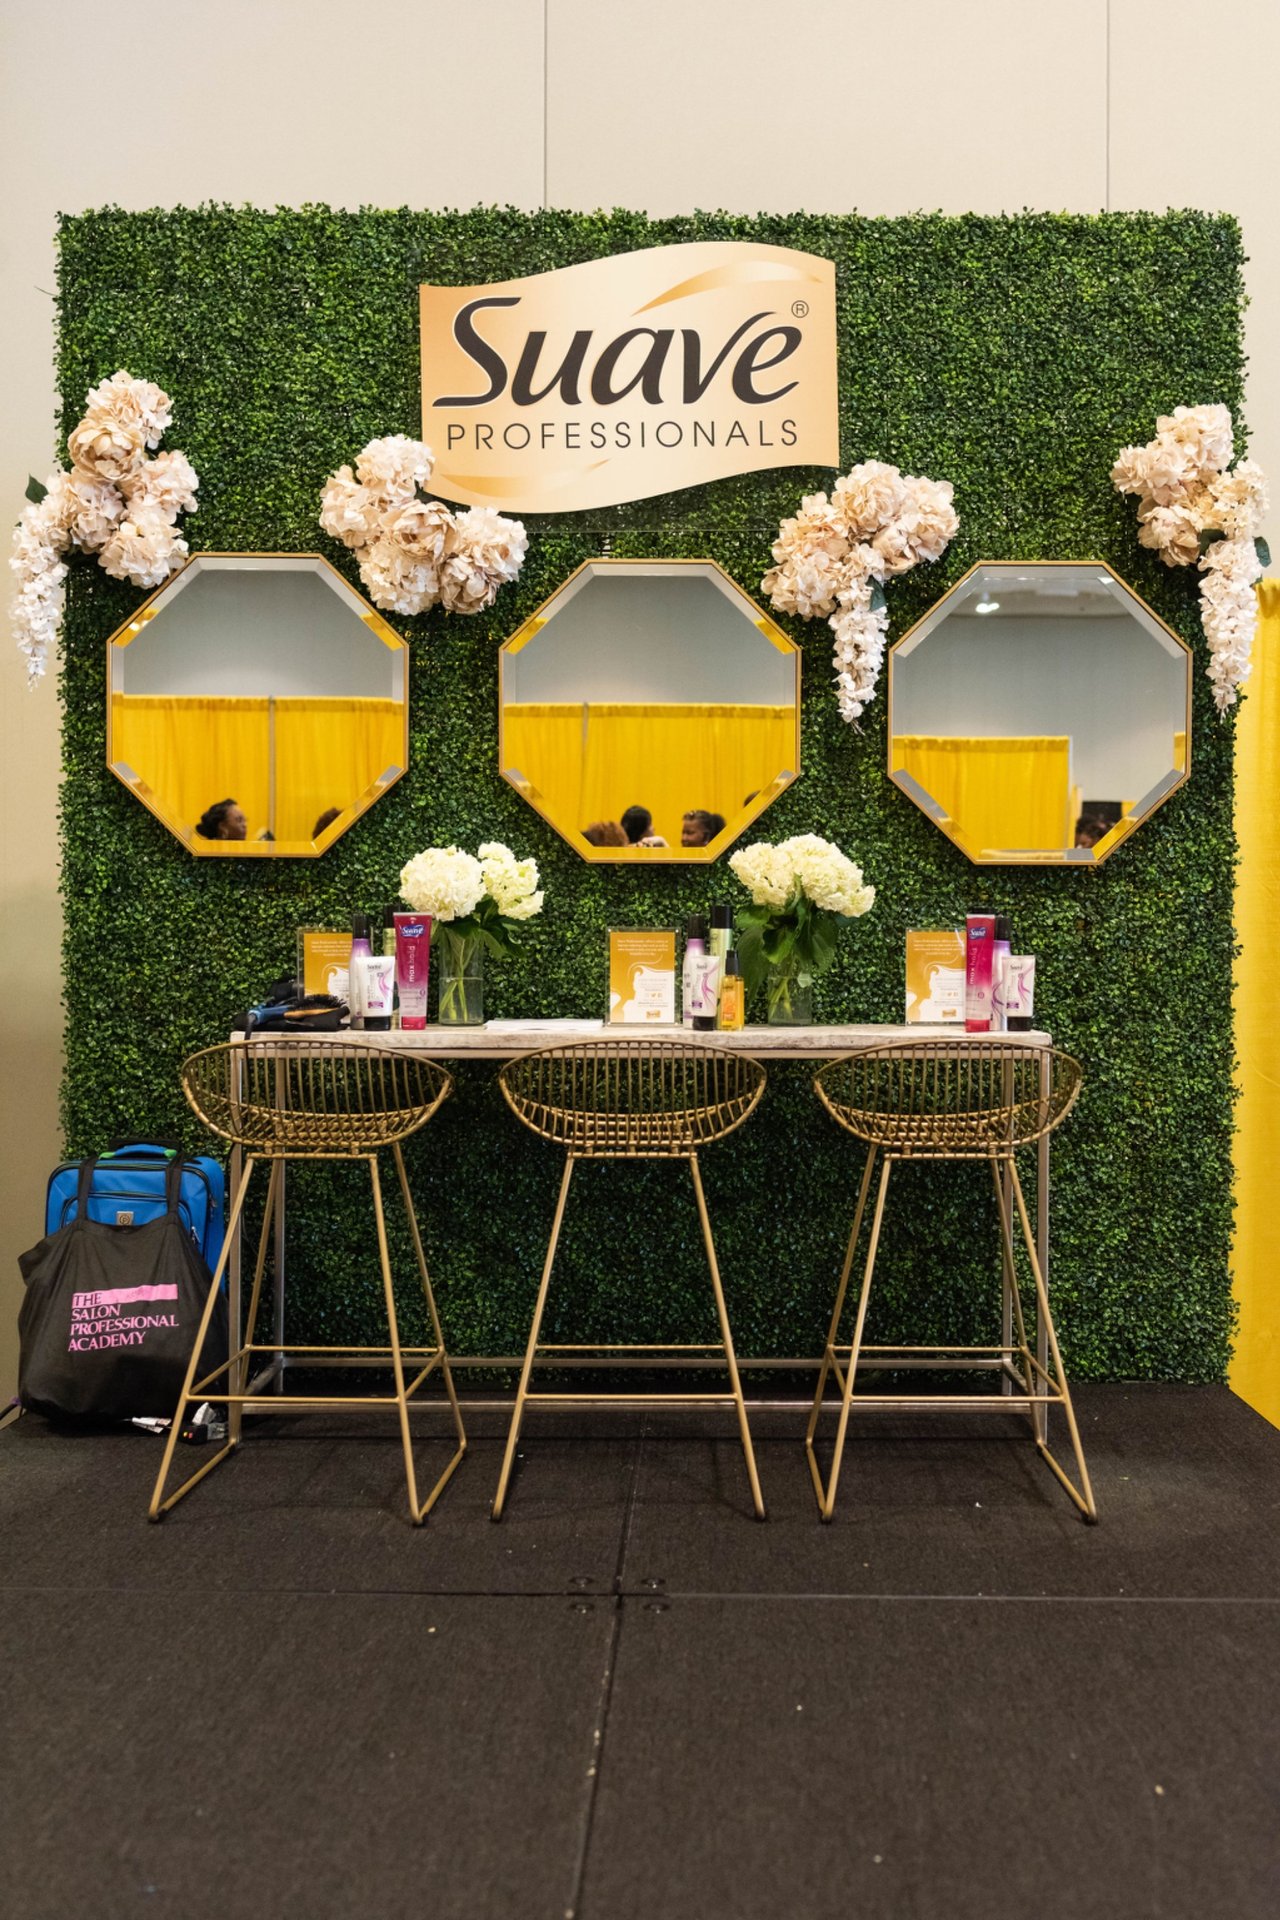 Suave at Dollar General Day of Beauty Tradeshow / Expo Activation in